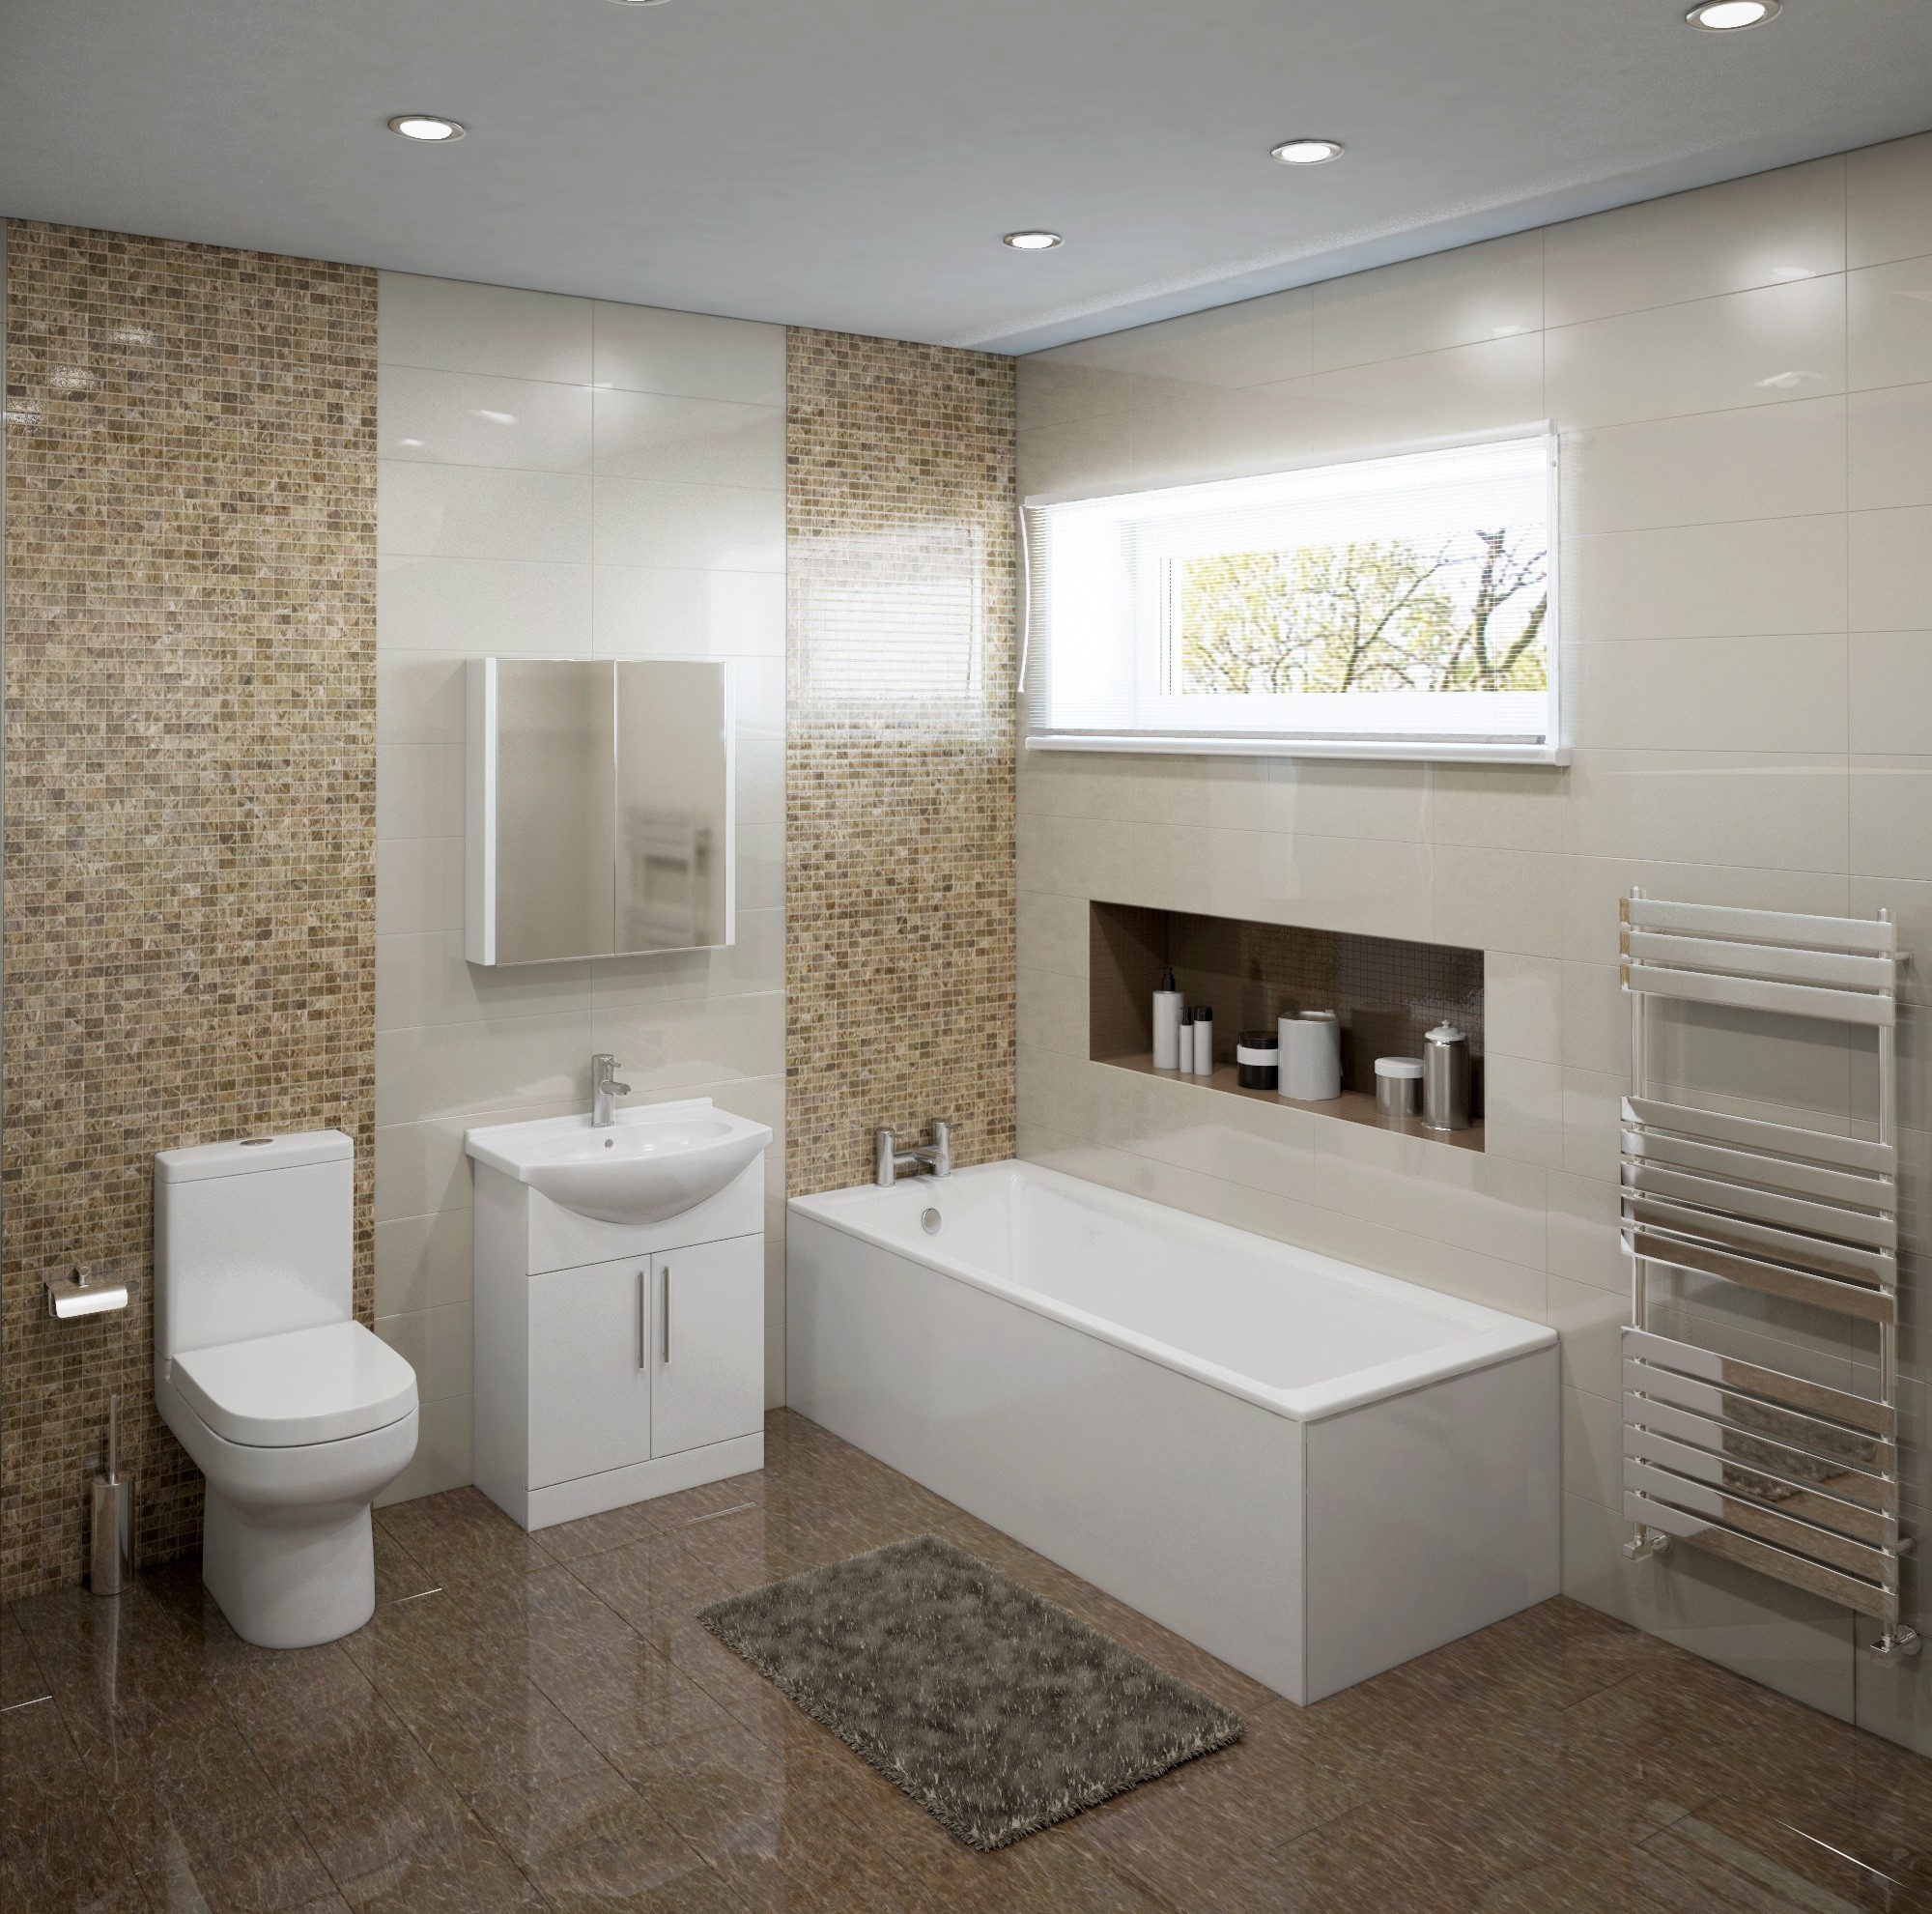 Single Ended 1700mm Shower Bath with Toilet Basin Panels and Bath Screen -  Alton - Furniture123